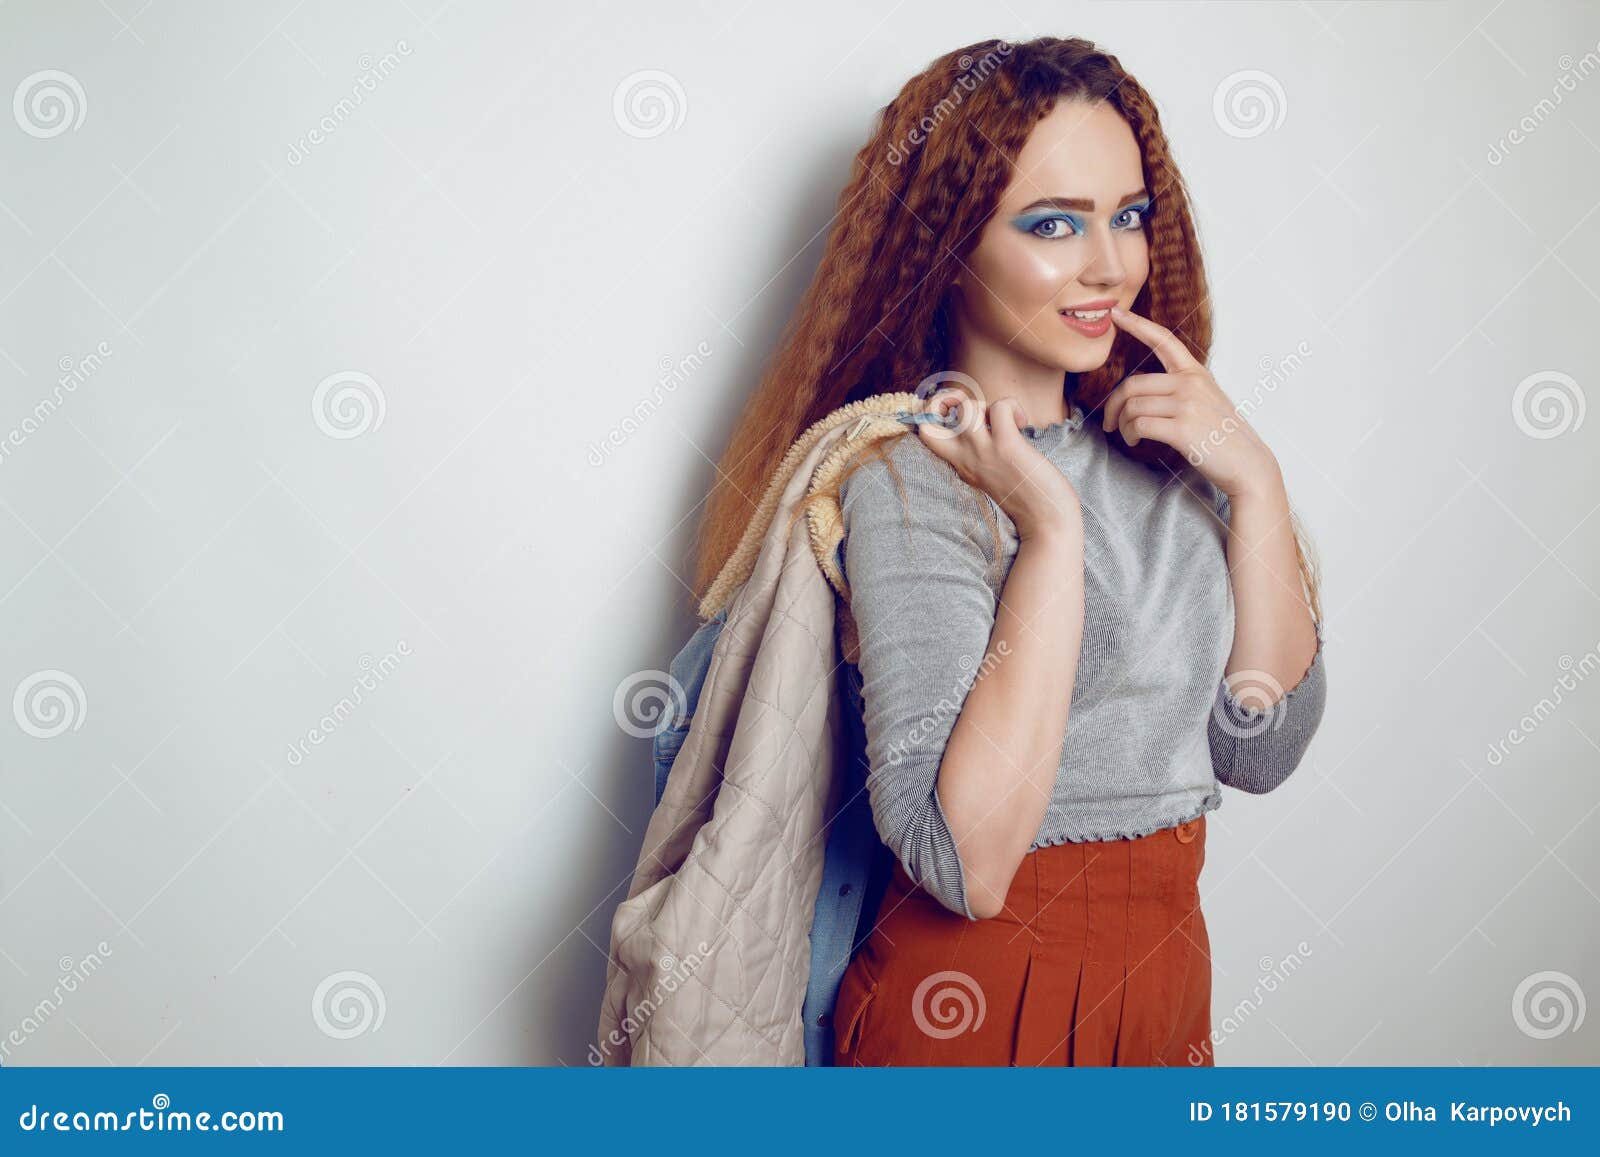 A with Curled Hair is Dancing, a Model in the Style of the 80s. 90s, with Bright Blue Make-up and a Jacket. the Stock - Image of model, party: